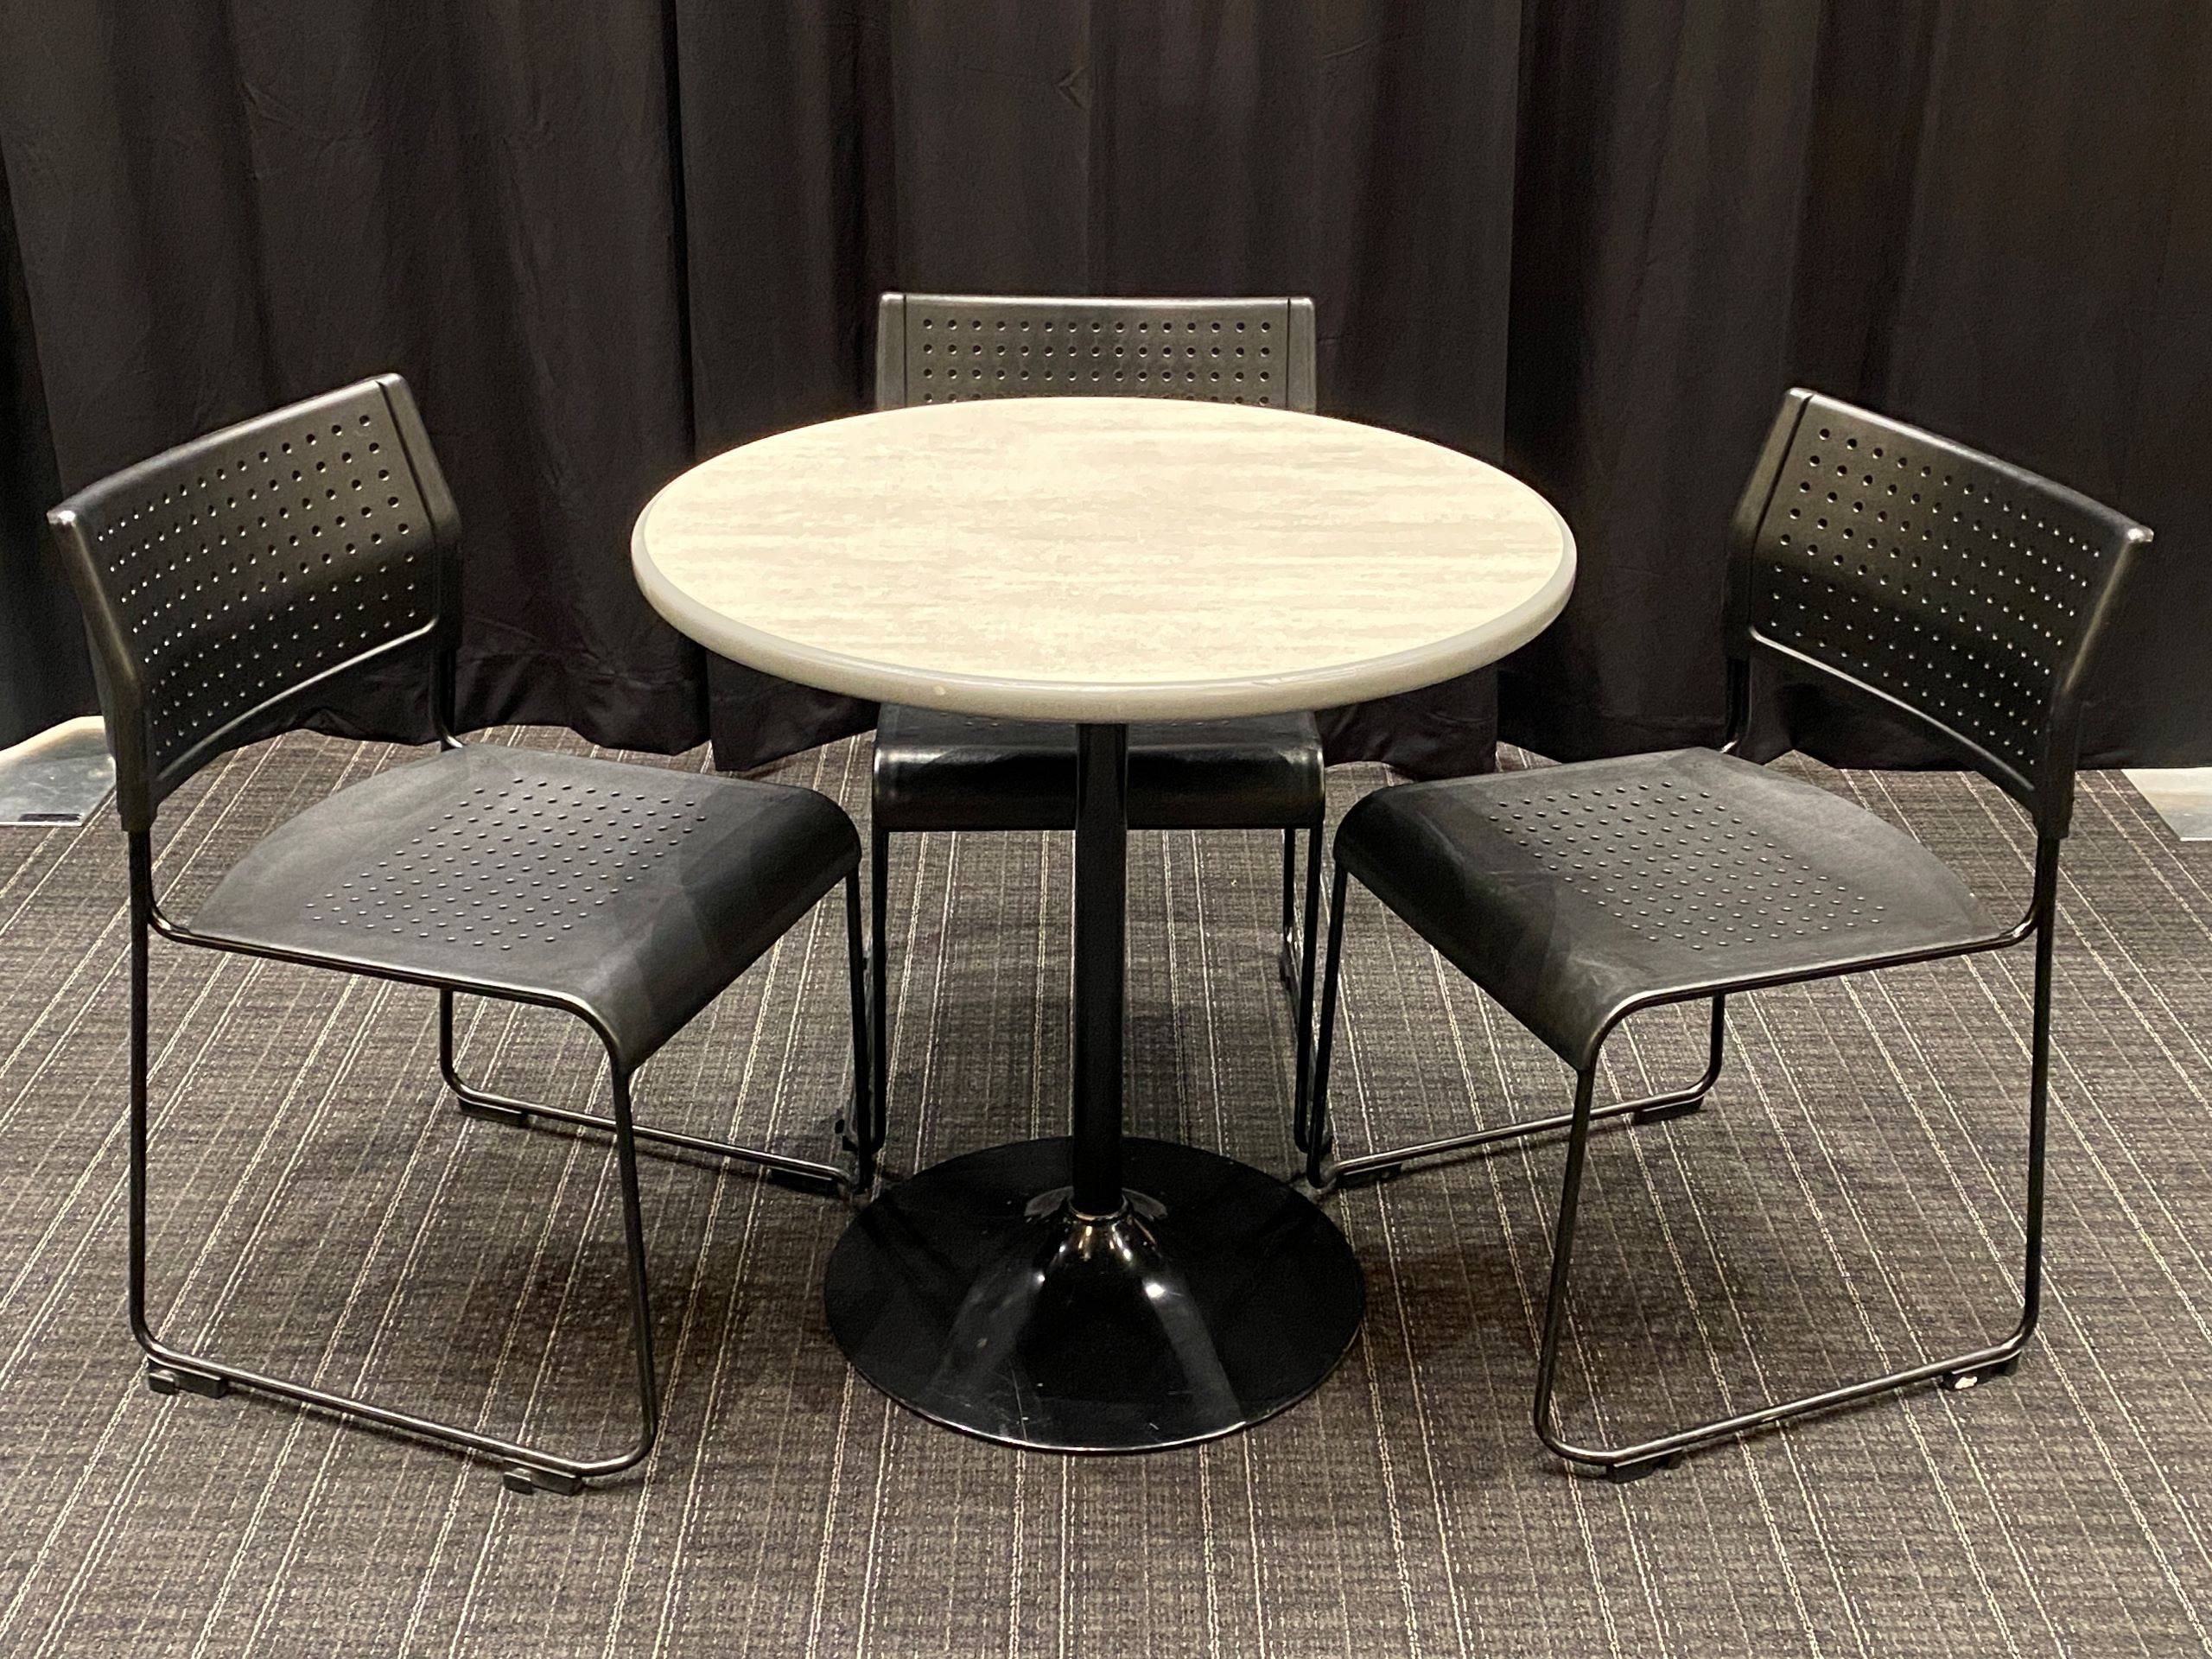 A bistro table at seated-height with 3 chairs.